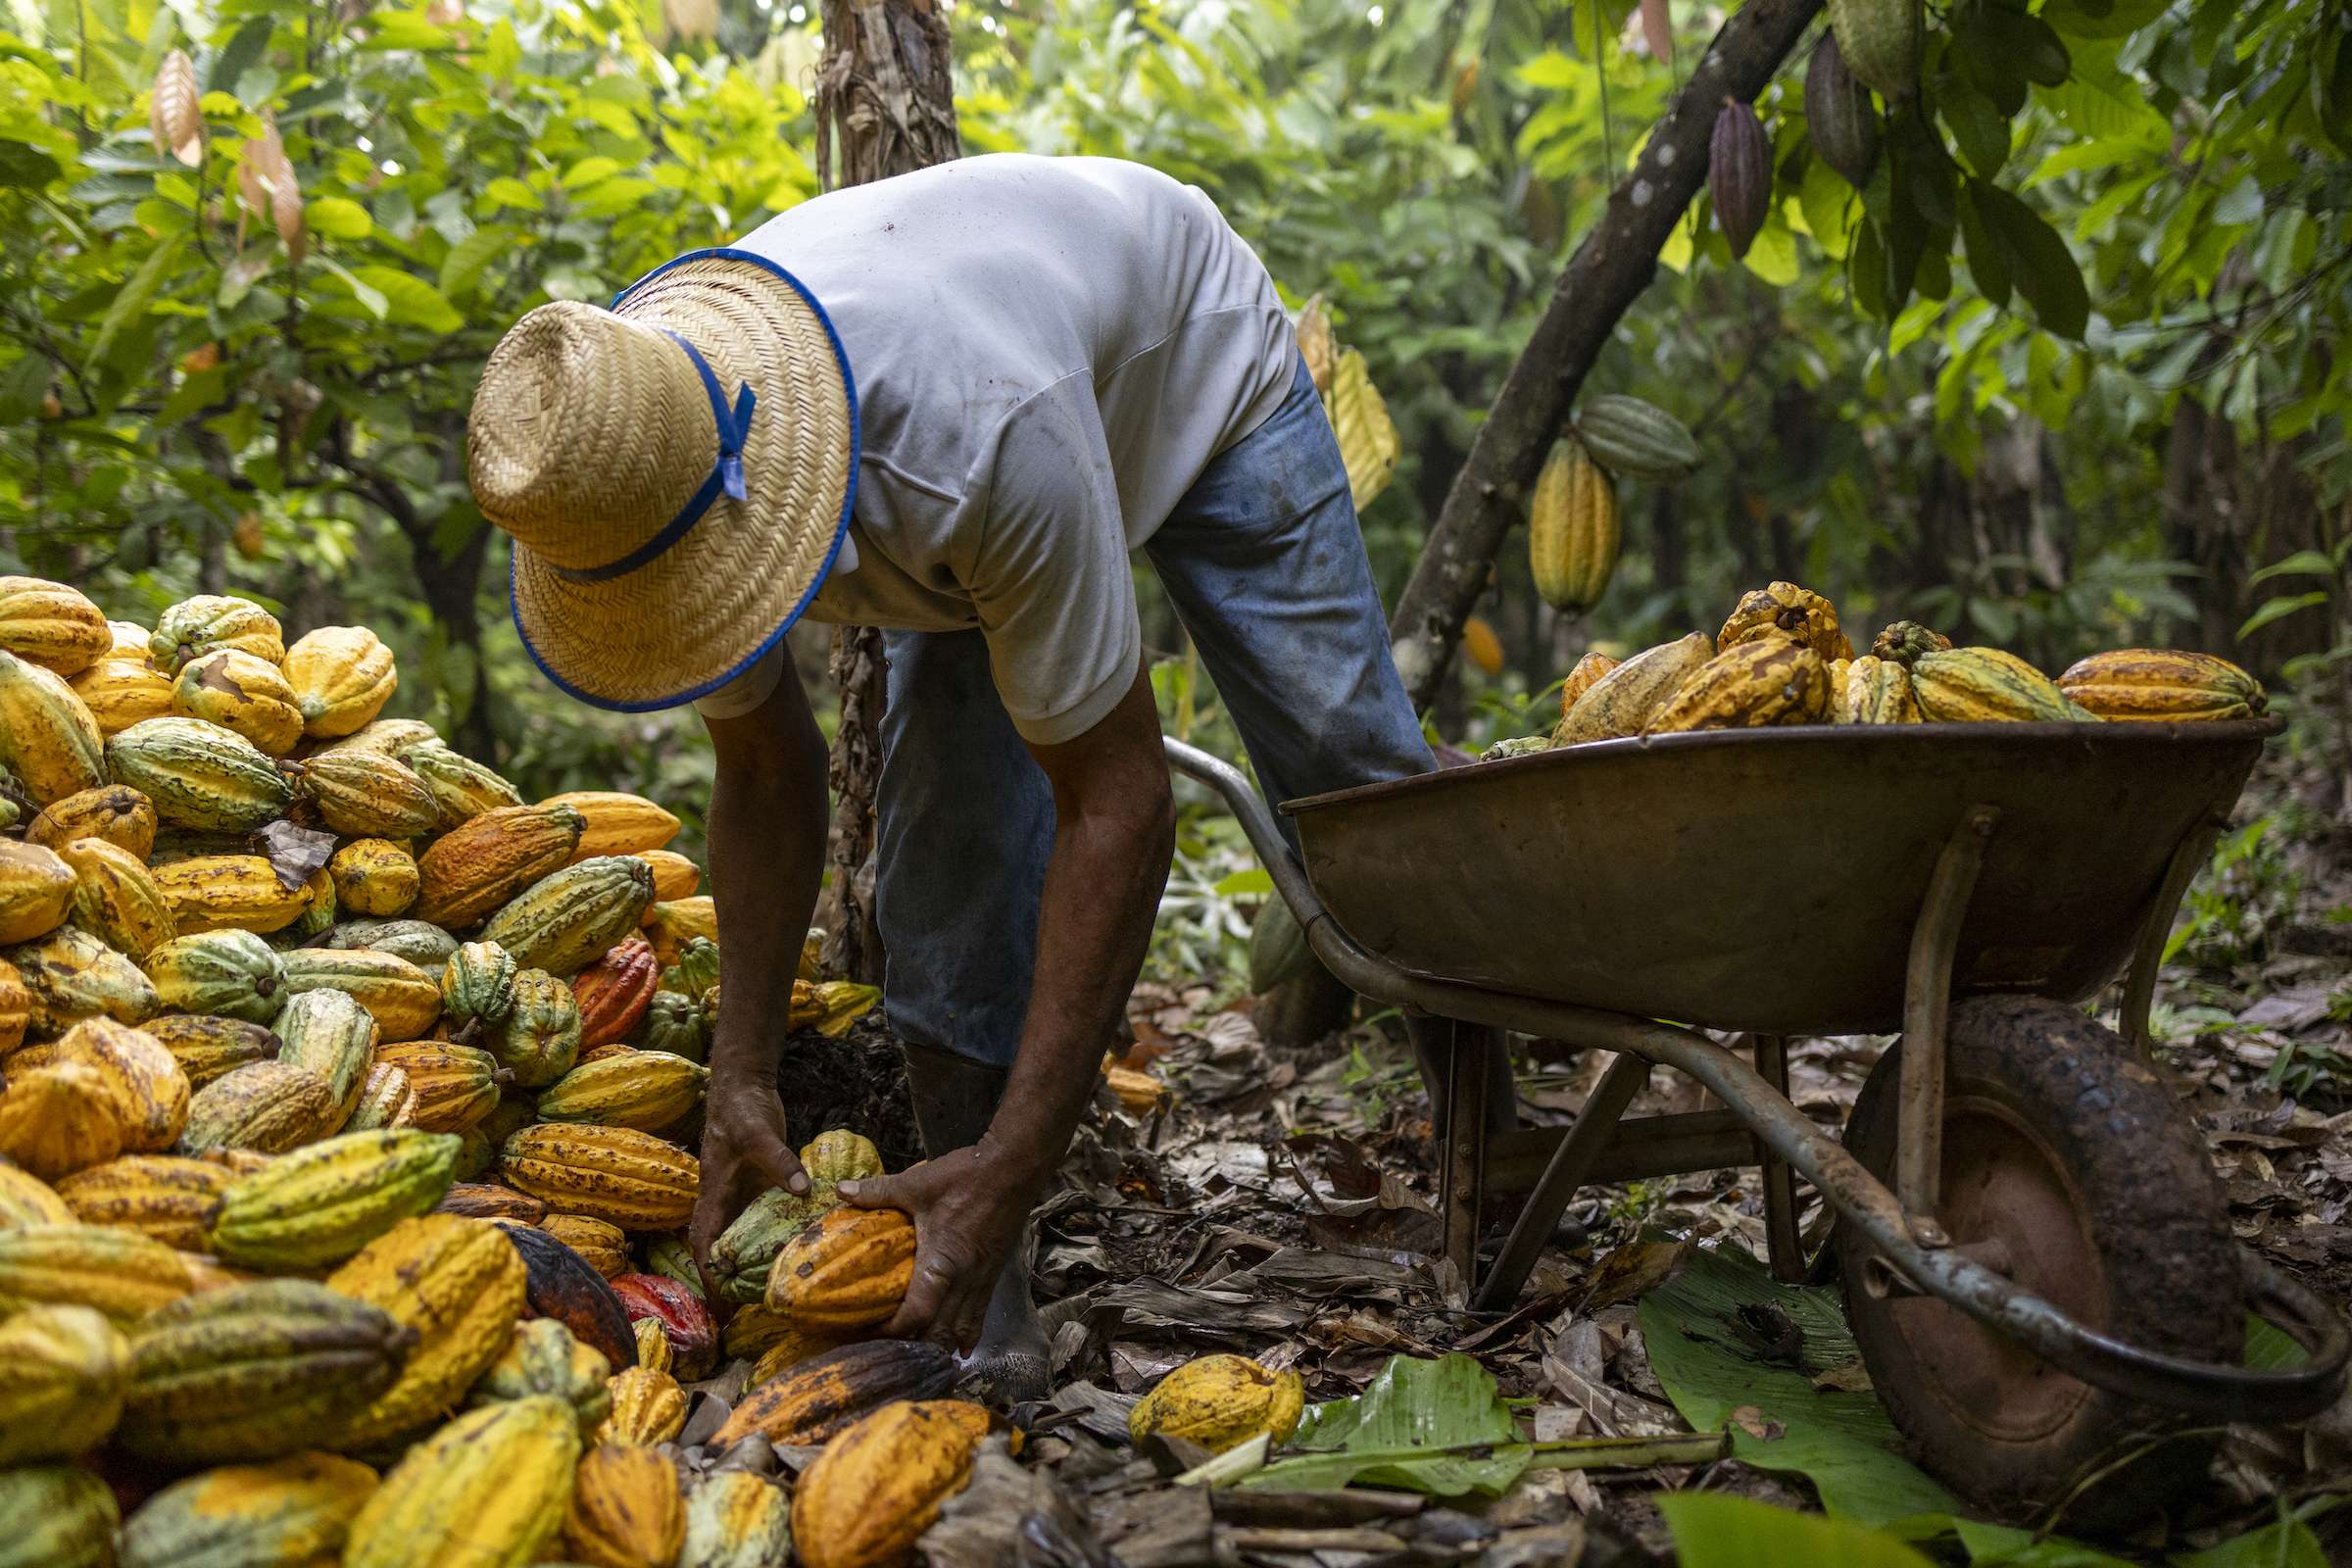 A crouching man moves green and yellow cacao beans from a pile to a wheelbarrow under a forest canopy